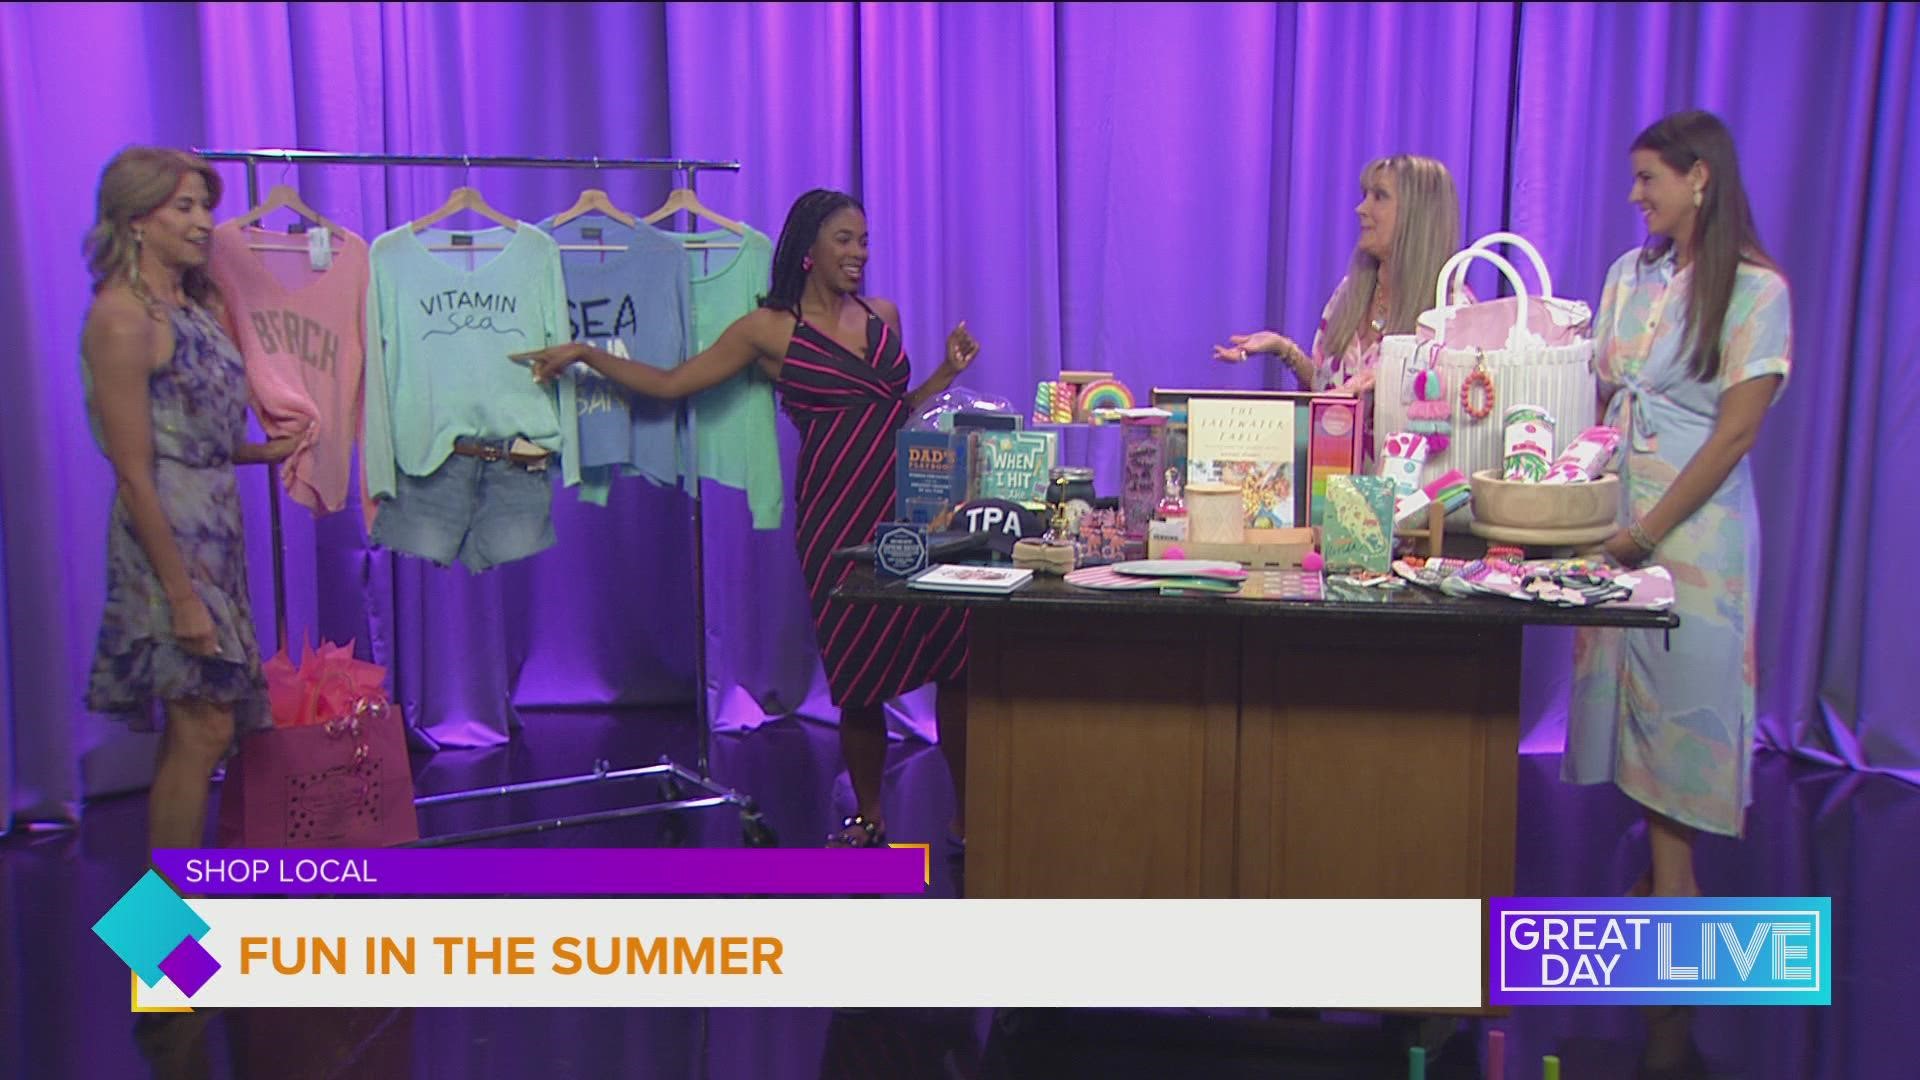 The ladies from Creme de la Creme show off accessories, clothing and games perfect for summer family fun!